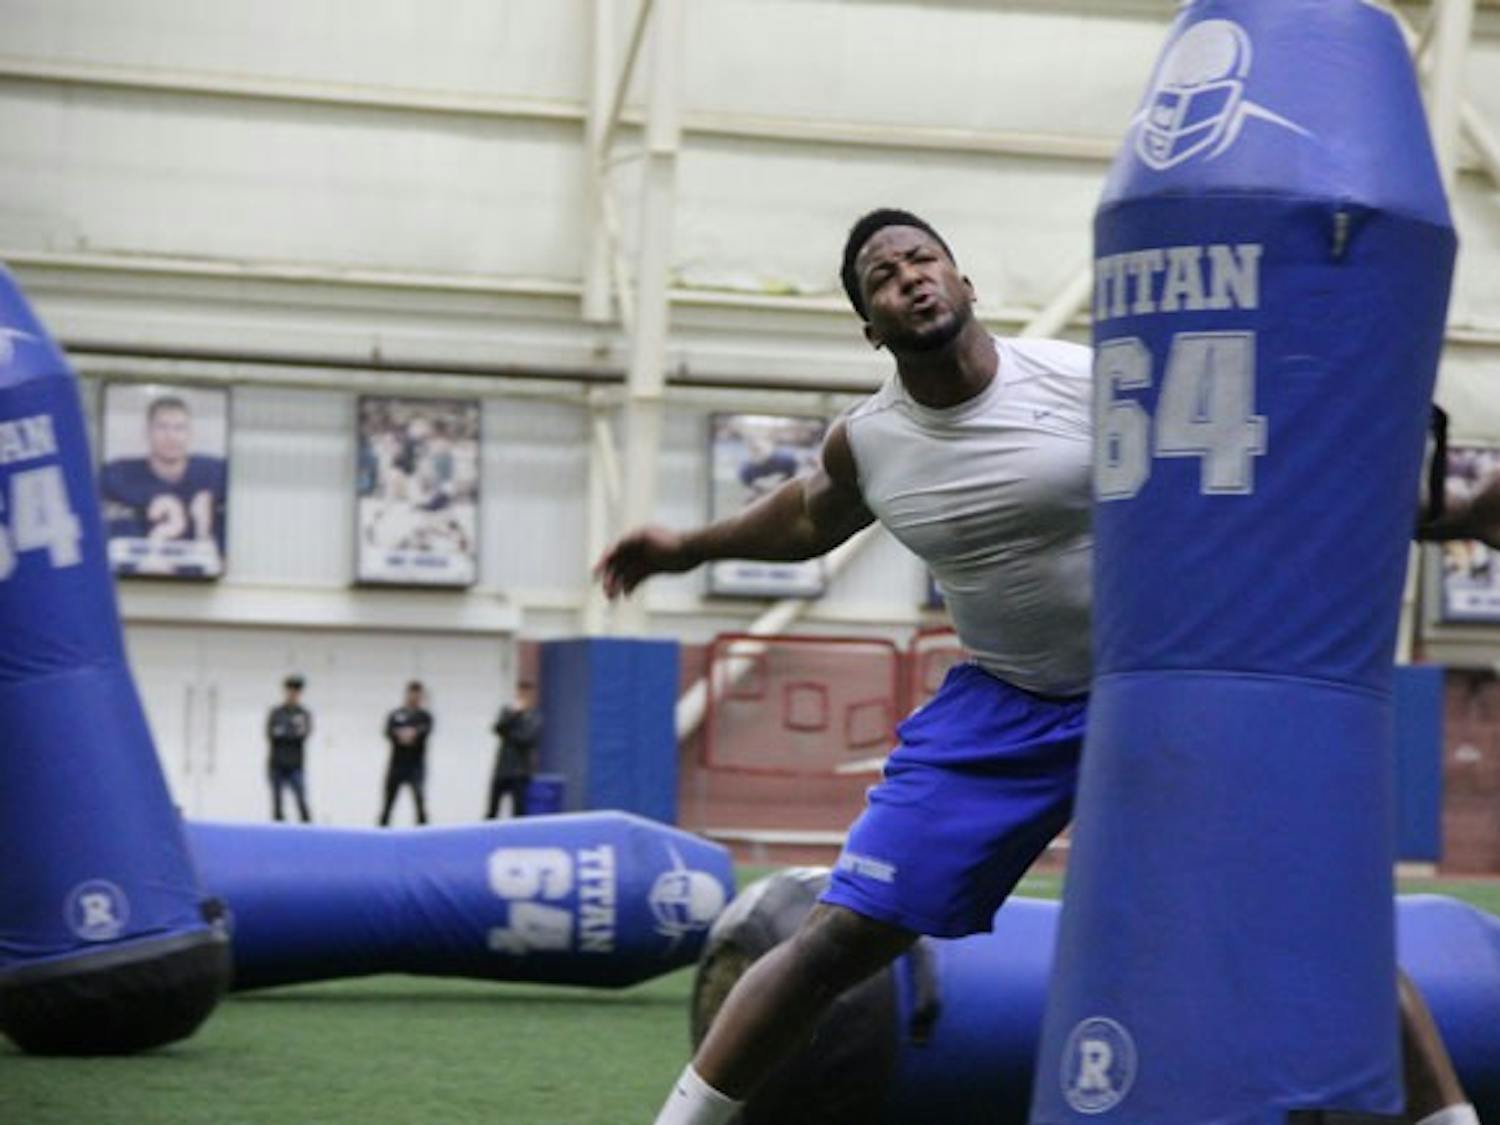 Tedroy Lynch, a graduated Bull, competes in a defensive drill, taking down tackle dummies.